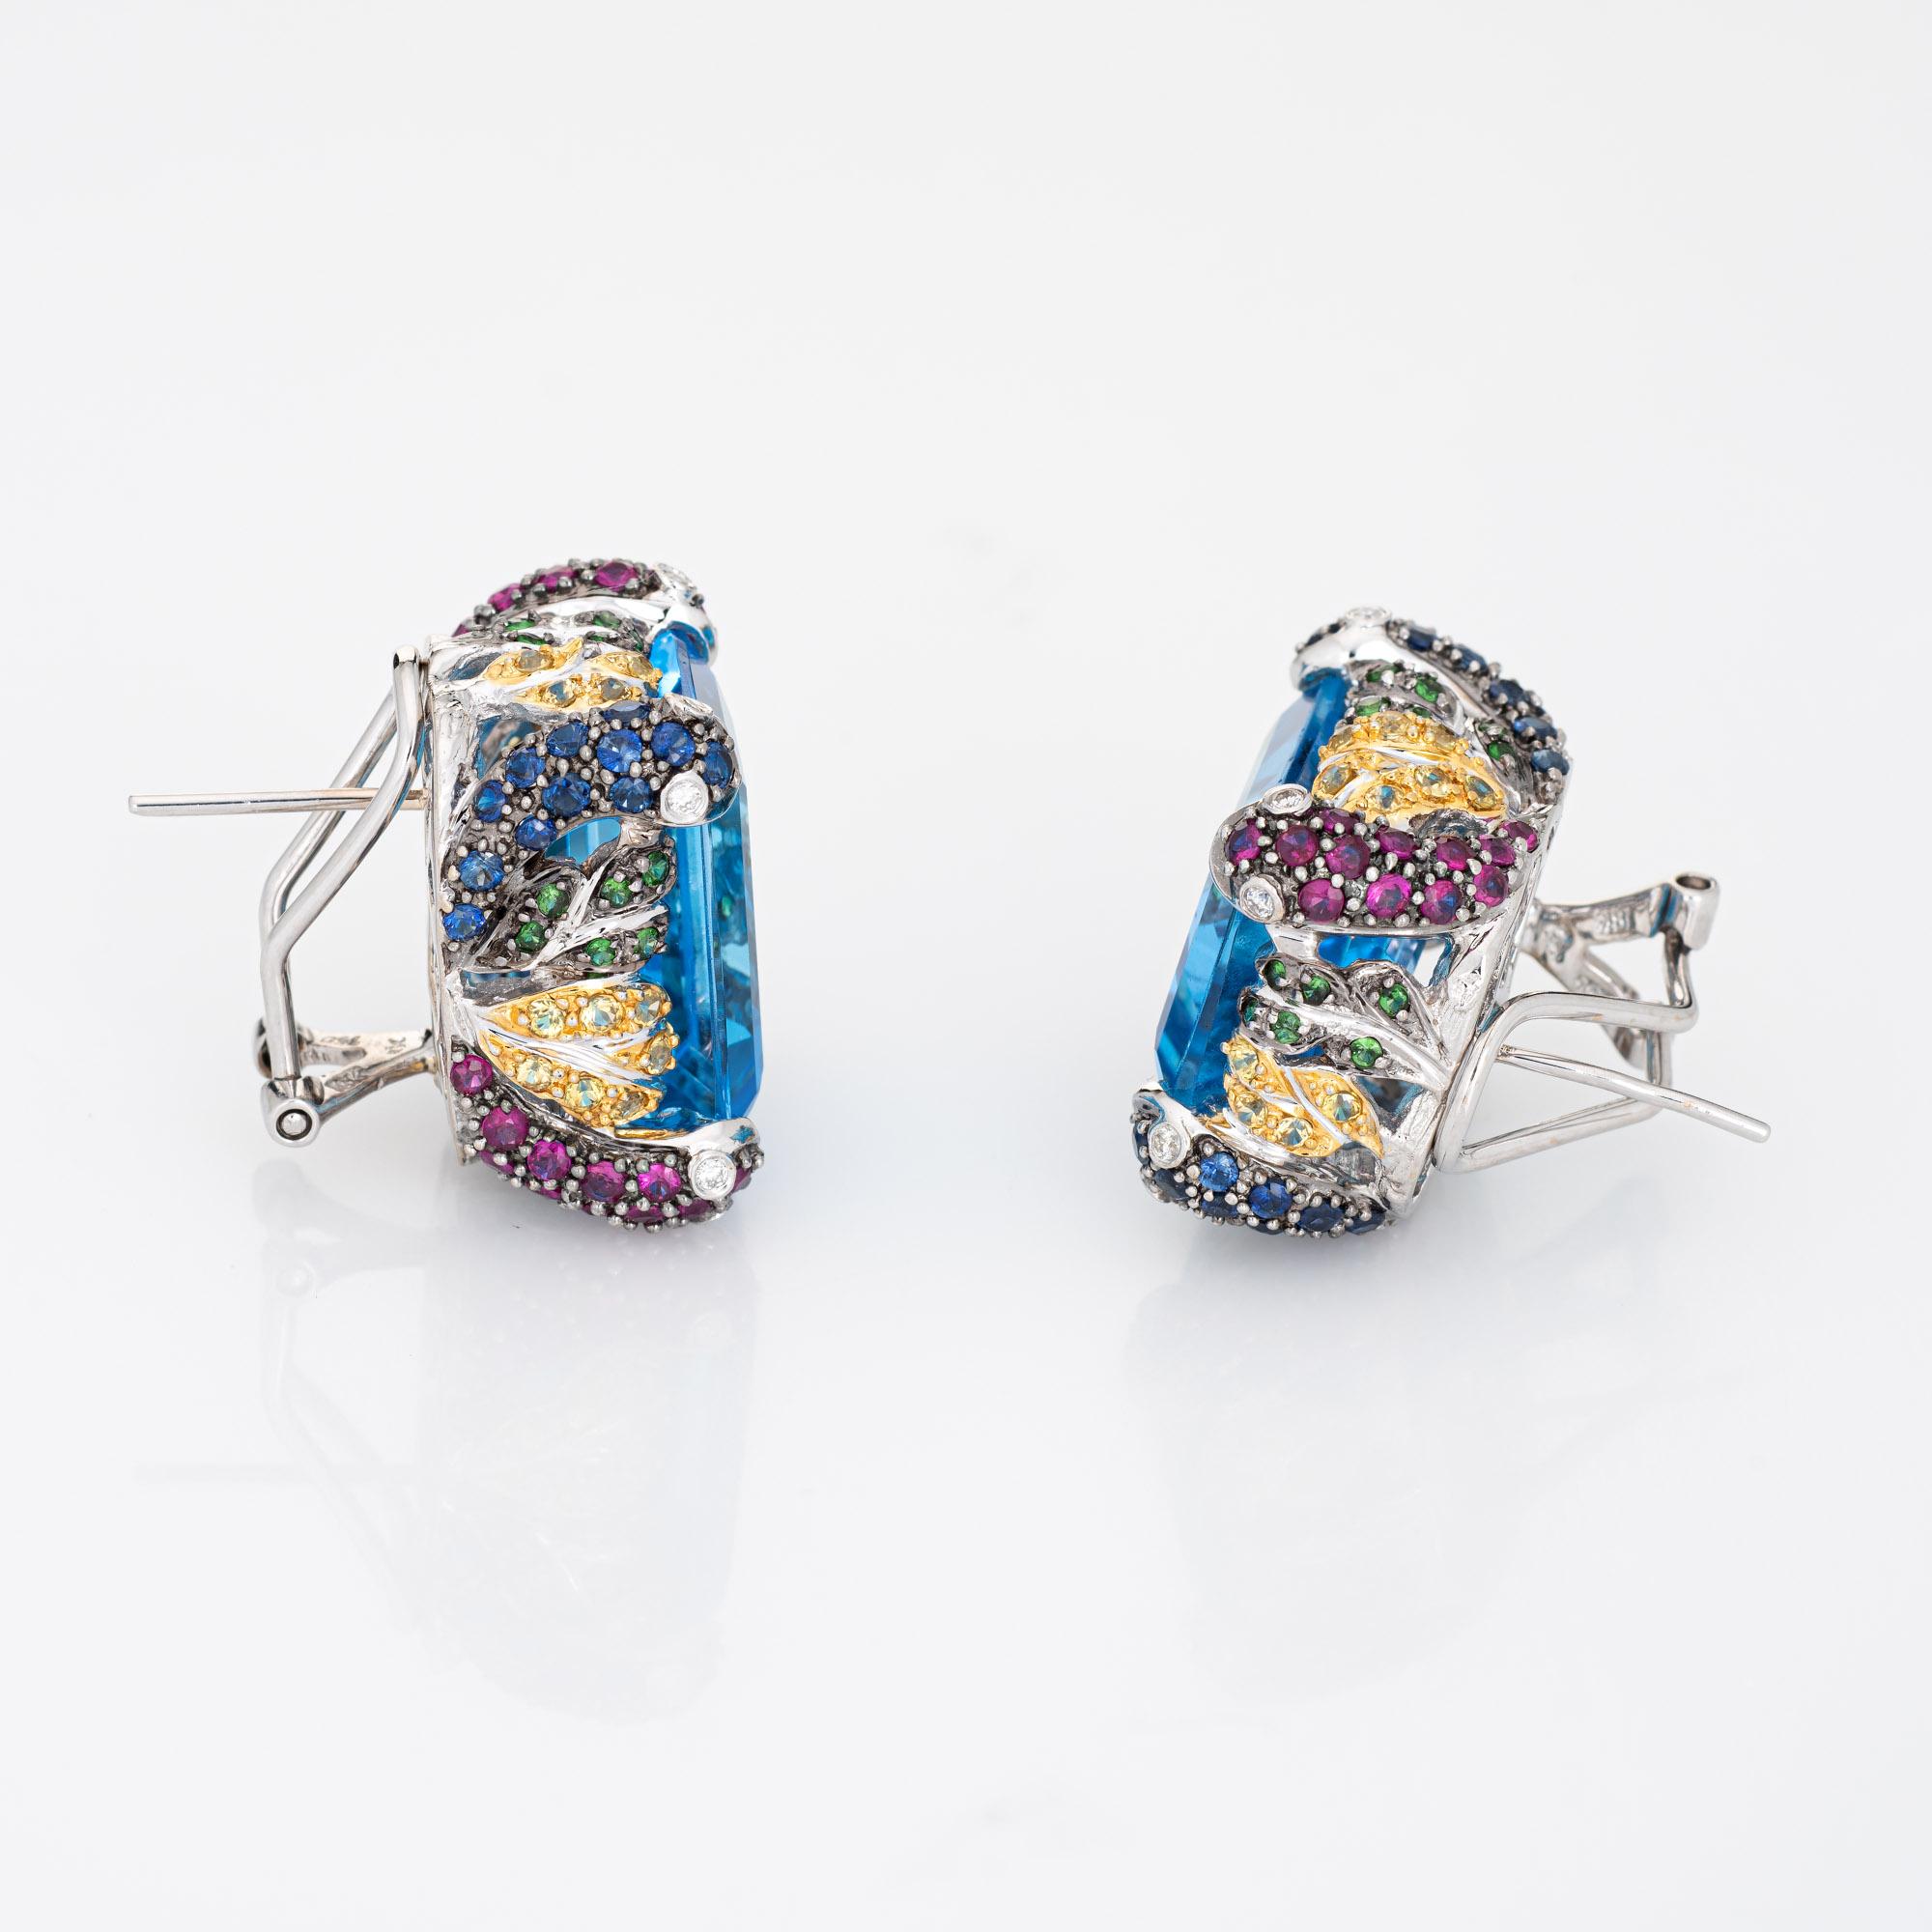 Dramatic pair of estate blue topaz, diamond & gemstone earrings crafted in 18k white gold. 

Emerald cut blue topaz measures 18mm x 13mm each (estimated at 16 carats each - 32 carats total estimated weight). Rubies, tsavorite garnets, yellow & blue